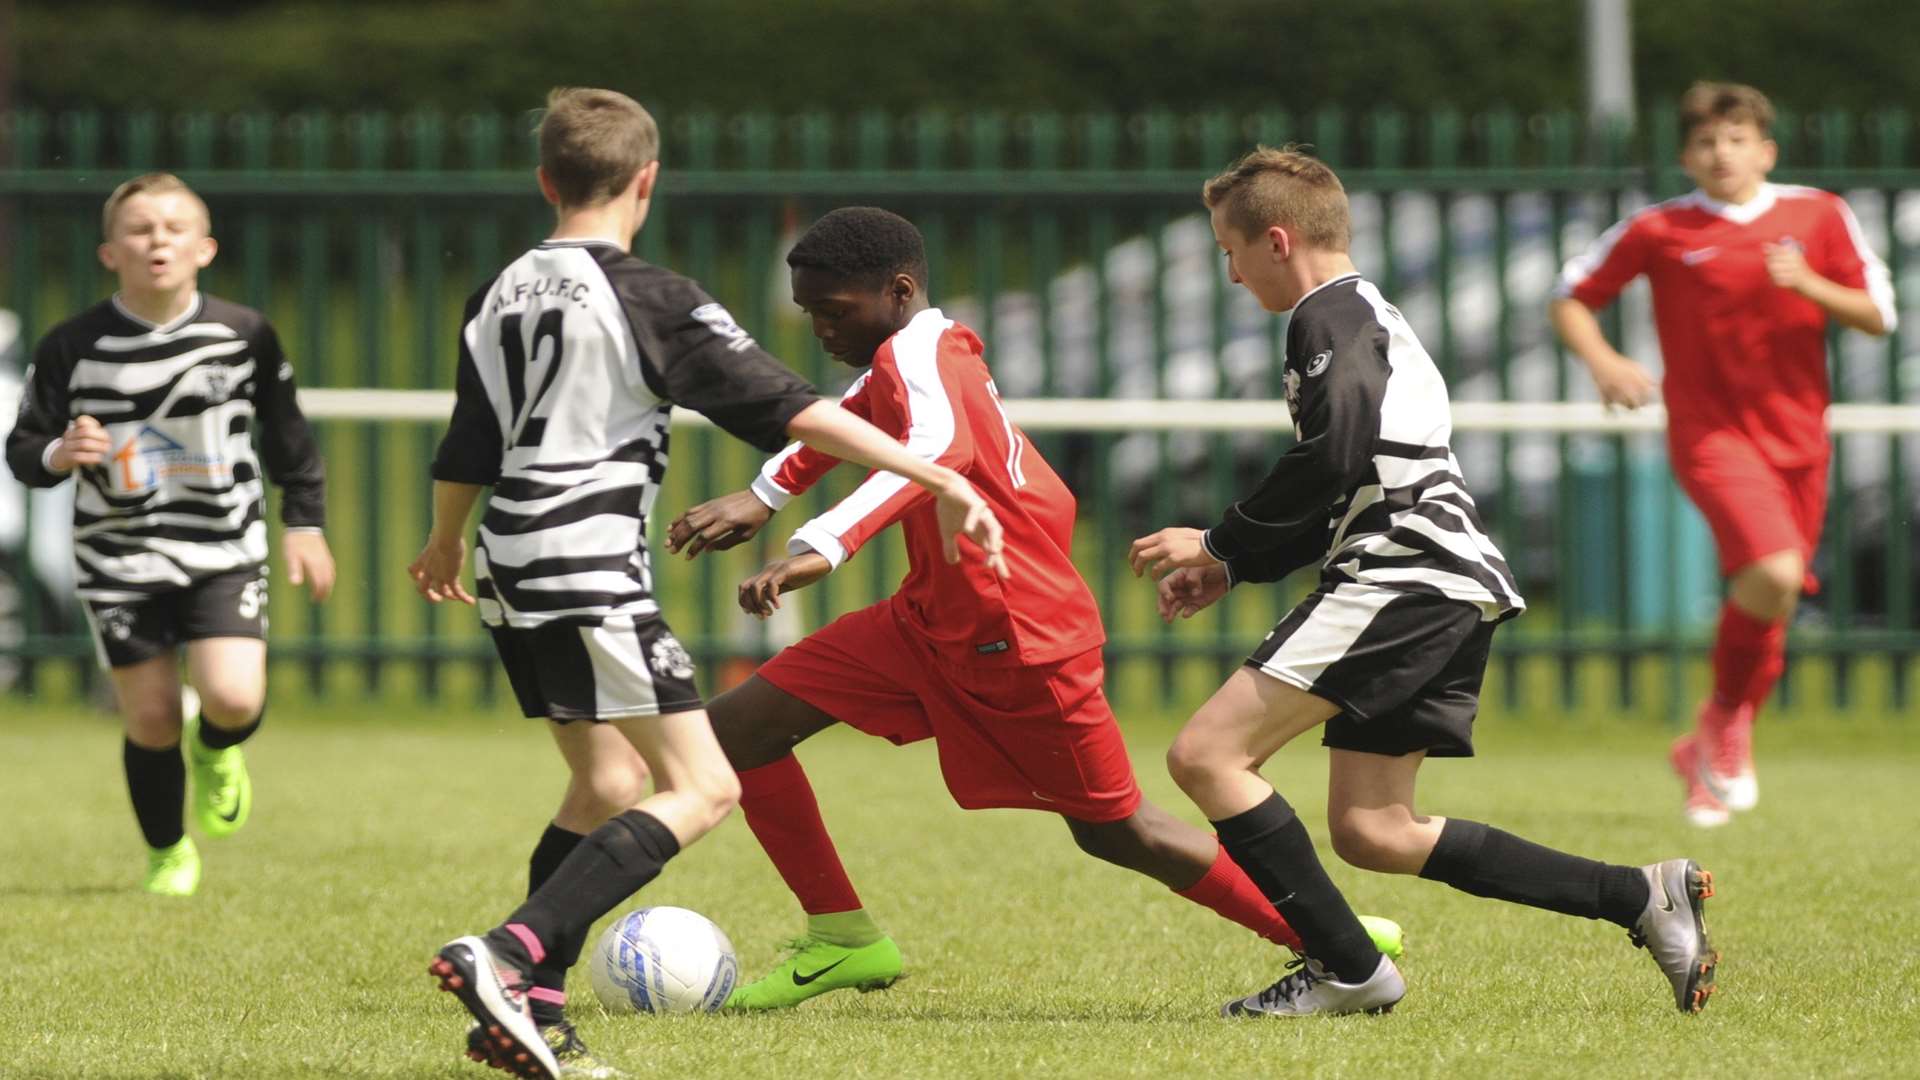 Rainham Kenilworth (red) take the game to Milton & Fulston United in the Under-13 League Cup final Picture: Steve Crispe